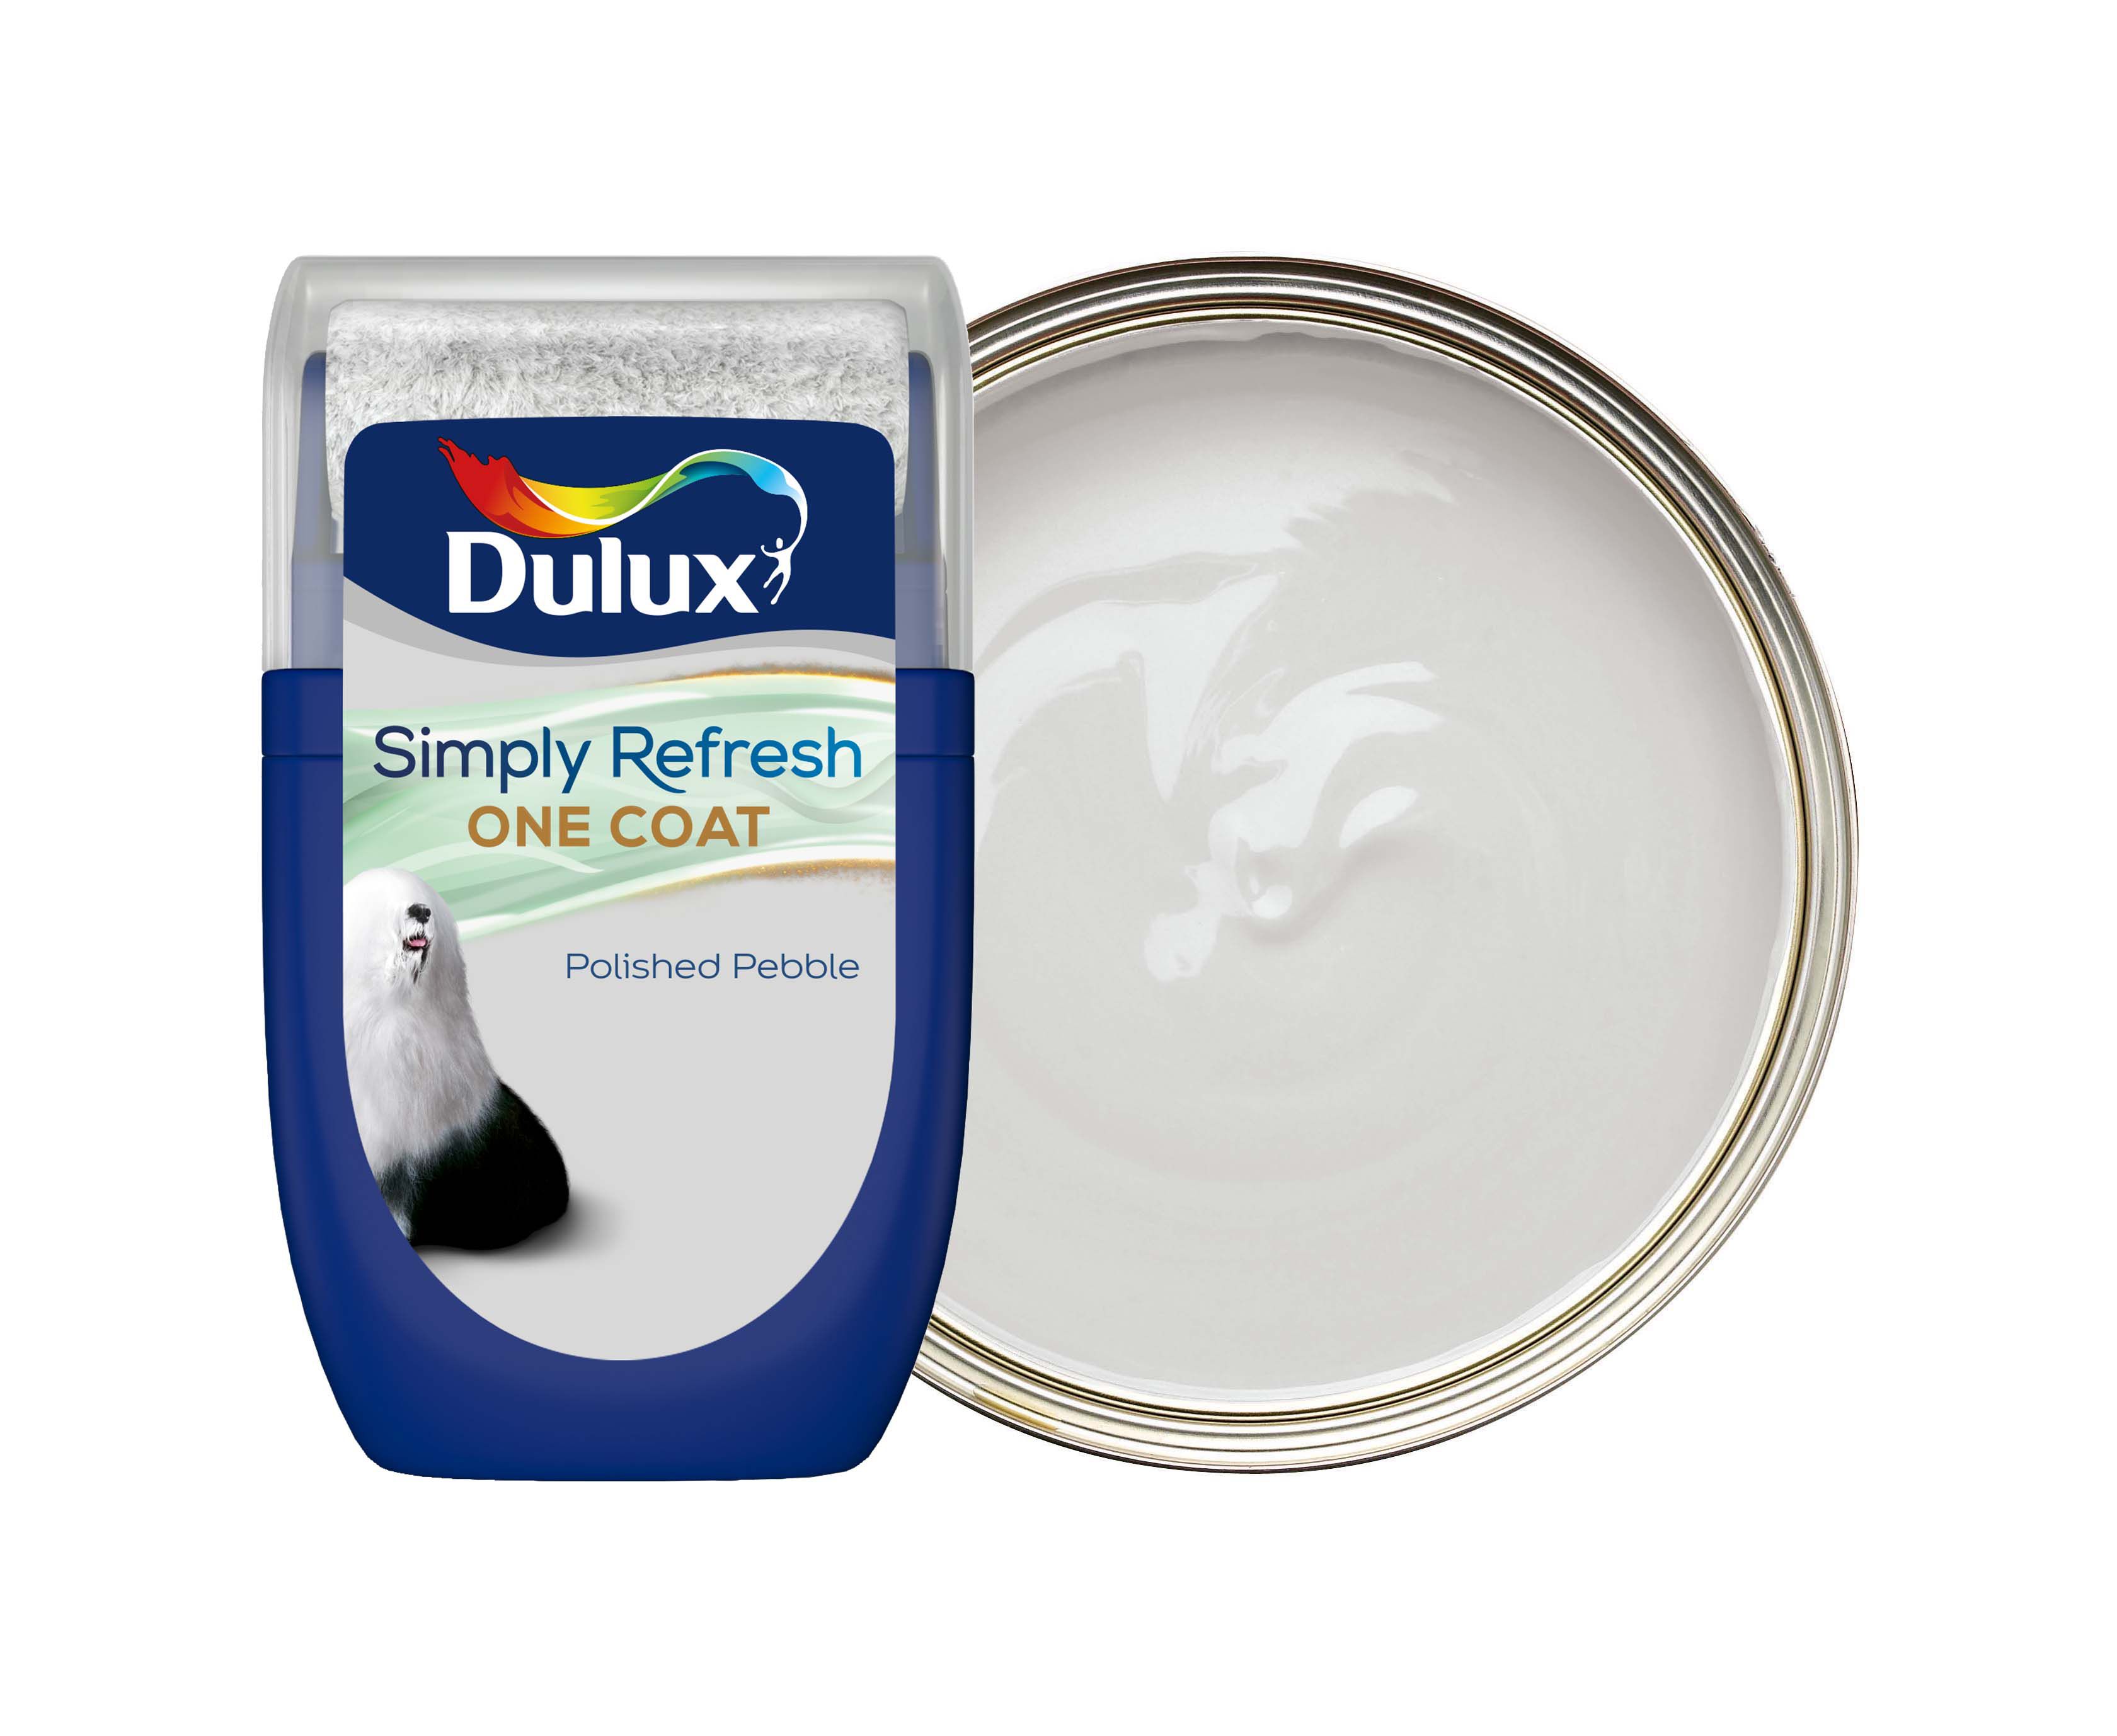 Dulux Simply Refresh One Coat Paint - Polished Pebble Tester Pot - 30ml